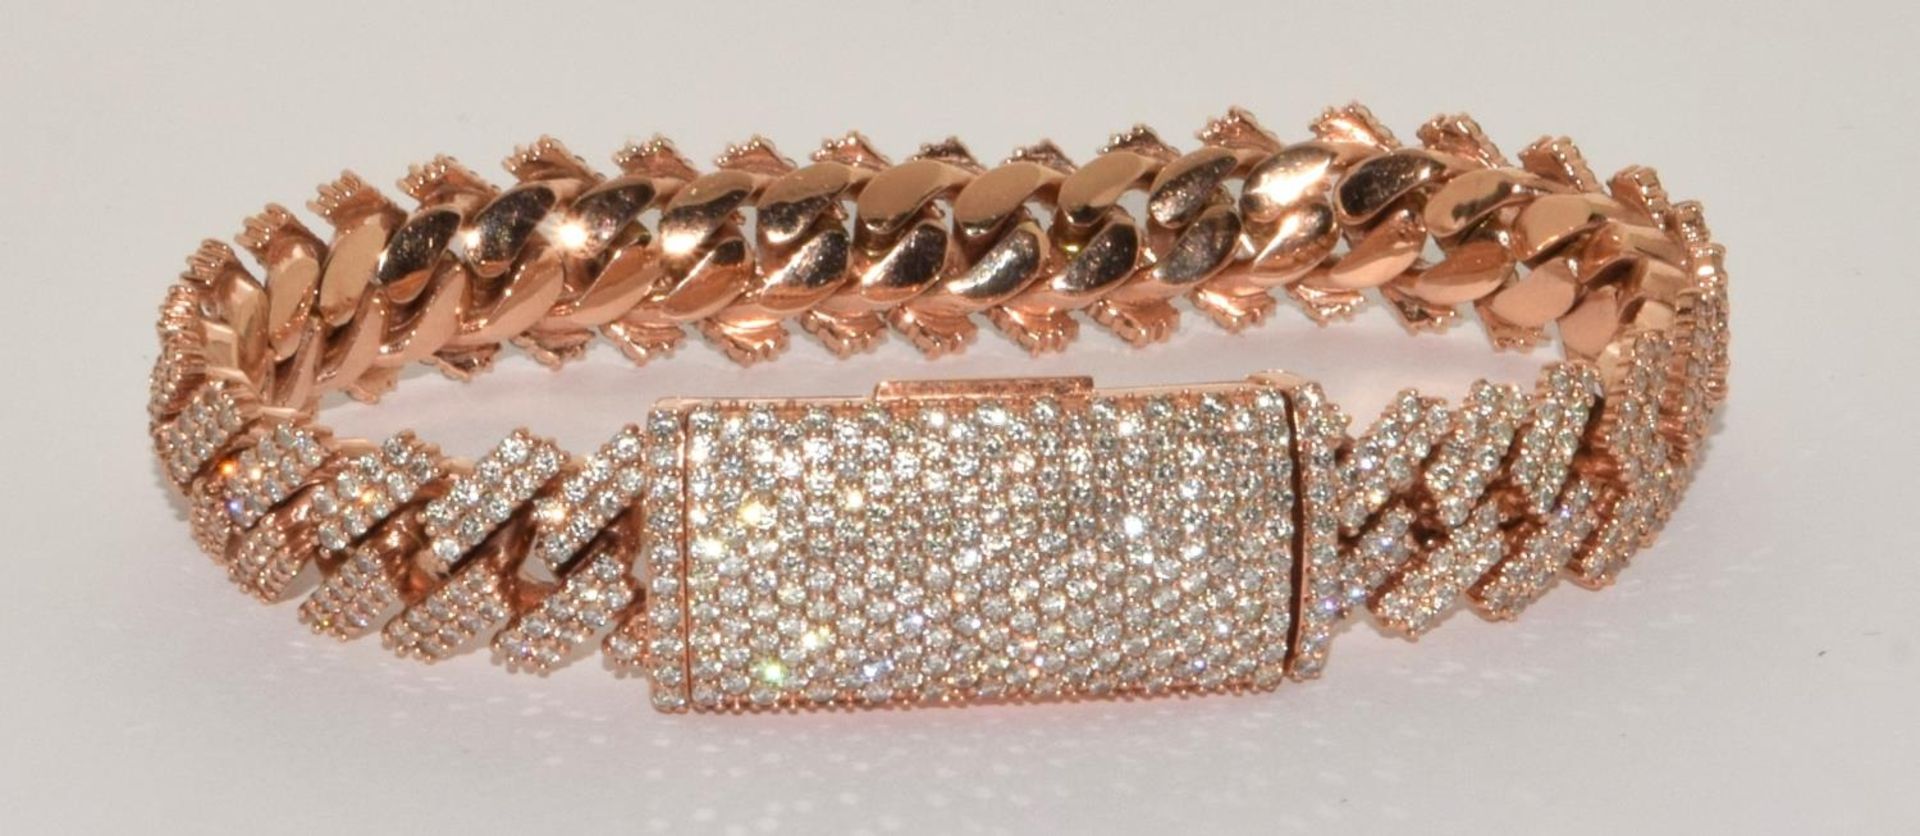 10ct rose gold Diamond encrusted bracelet set with approx 5ct diamonds in a herring bone pattern - Image 9 of 9